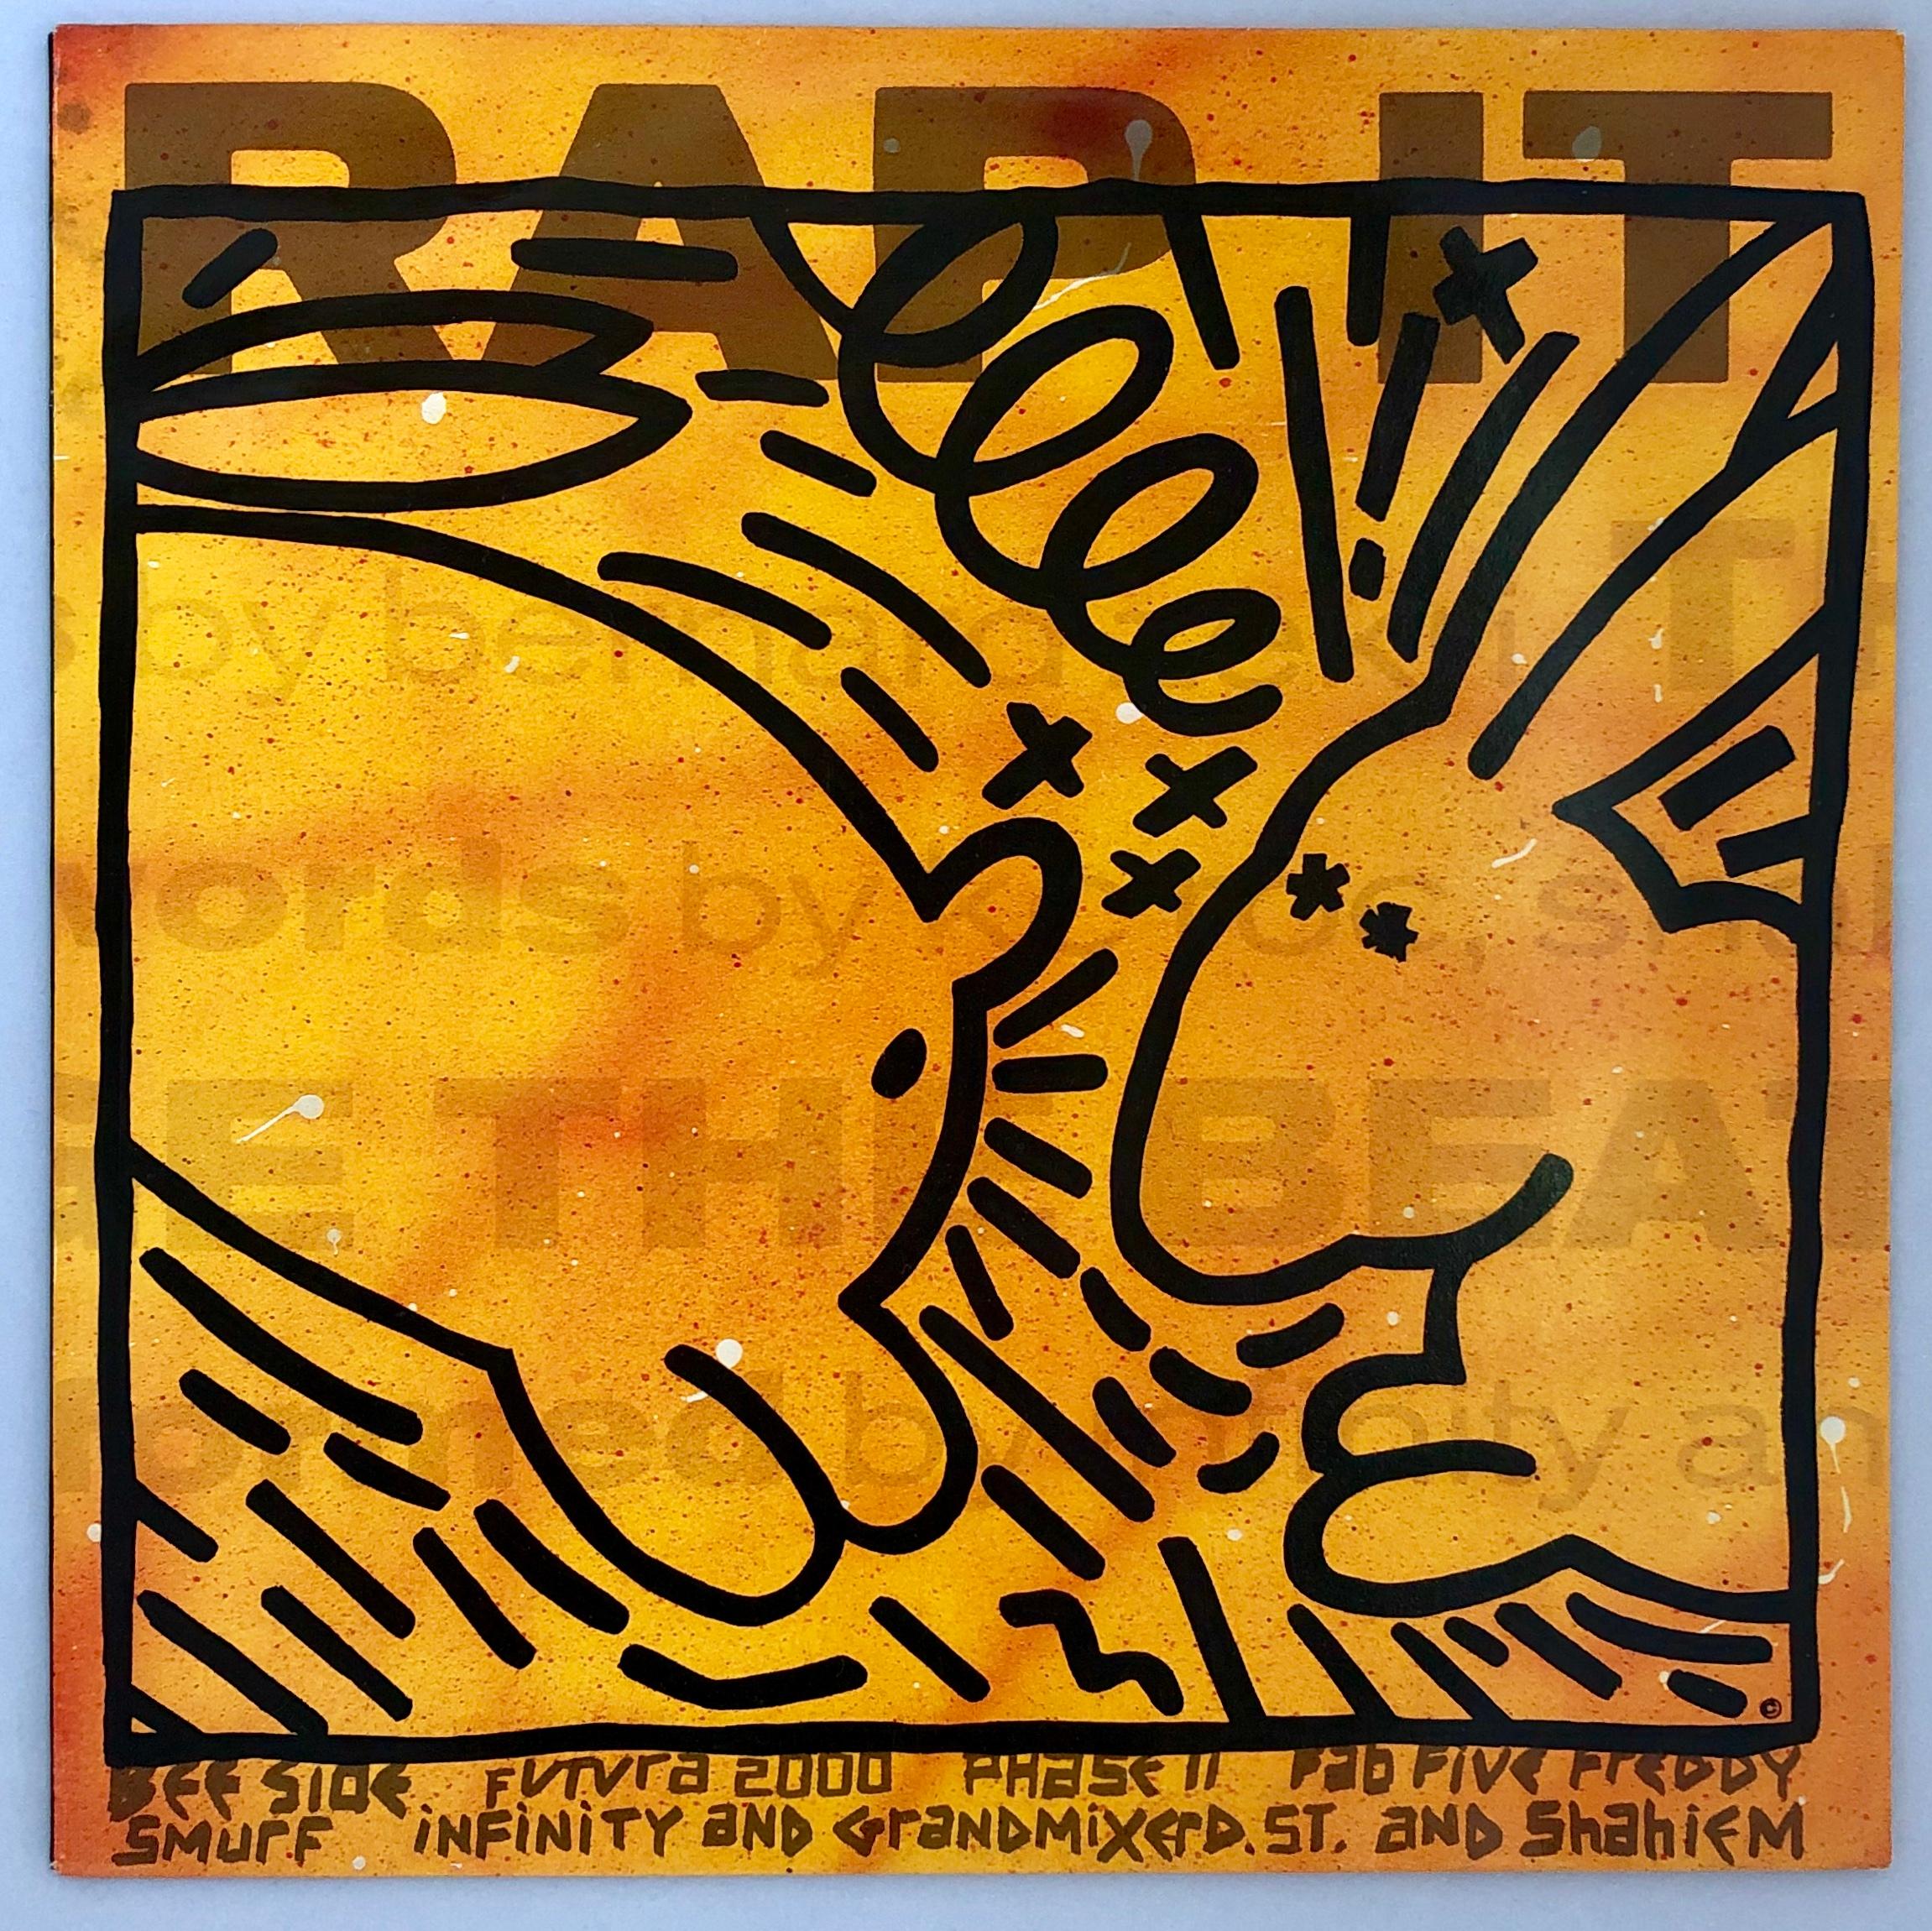 Keith Haring 'Rap It' record art 1983
A rare  vinyl art cover featuring original artwork by Keith Haring and Futura 2000 (reverse side). Truly vibrant colors that make for stand-out wall art. Looks very cool framed. 

In 1983 Material did some